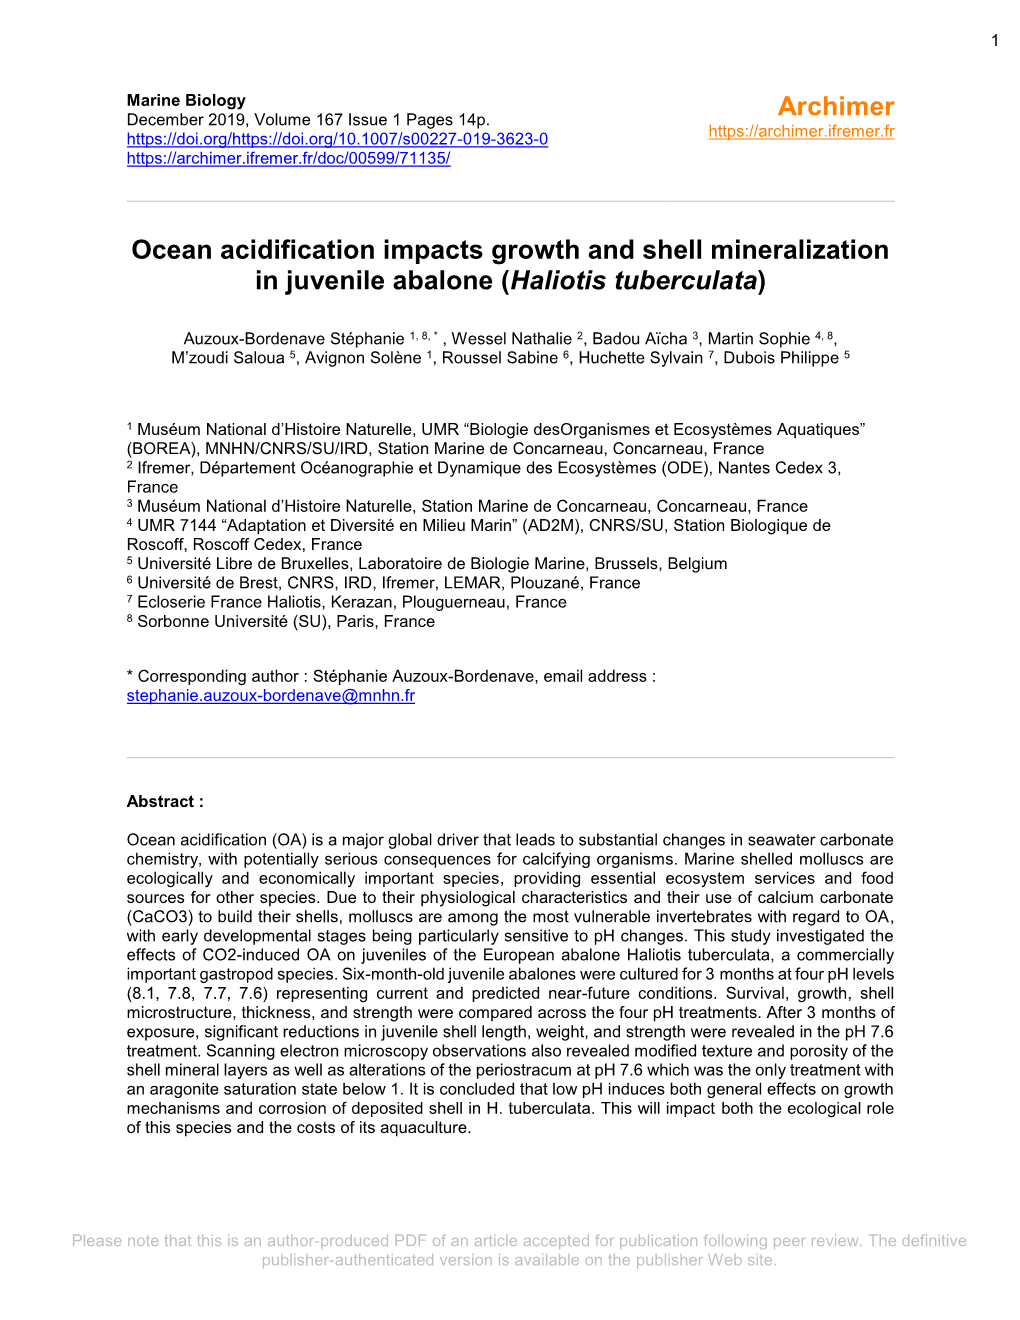 Ocean Acidification Impacts Growth and Shell Mineralization in Juvenile Abalone (Haliotis Tuberculata)